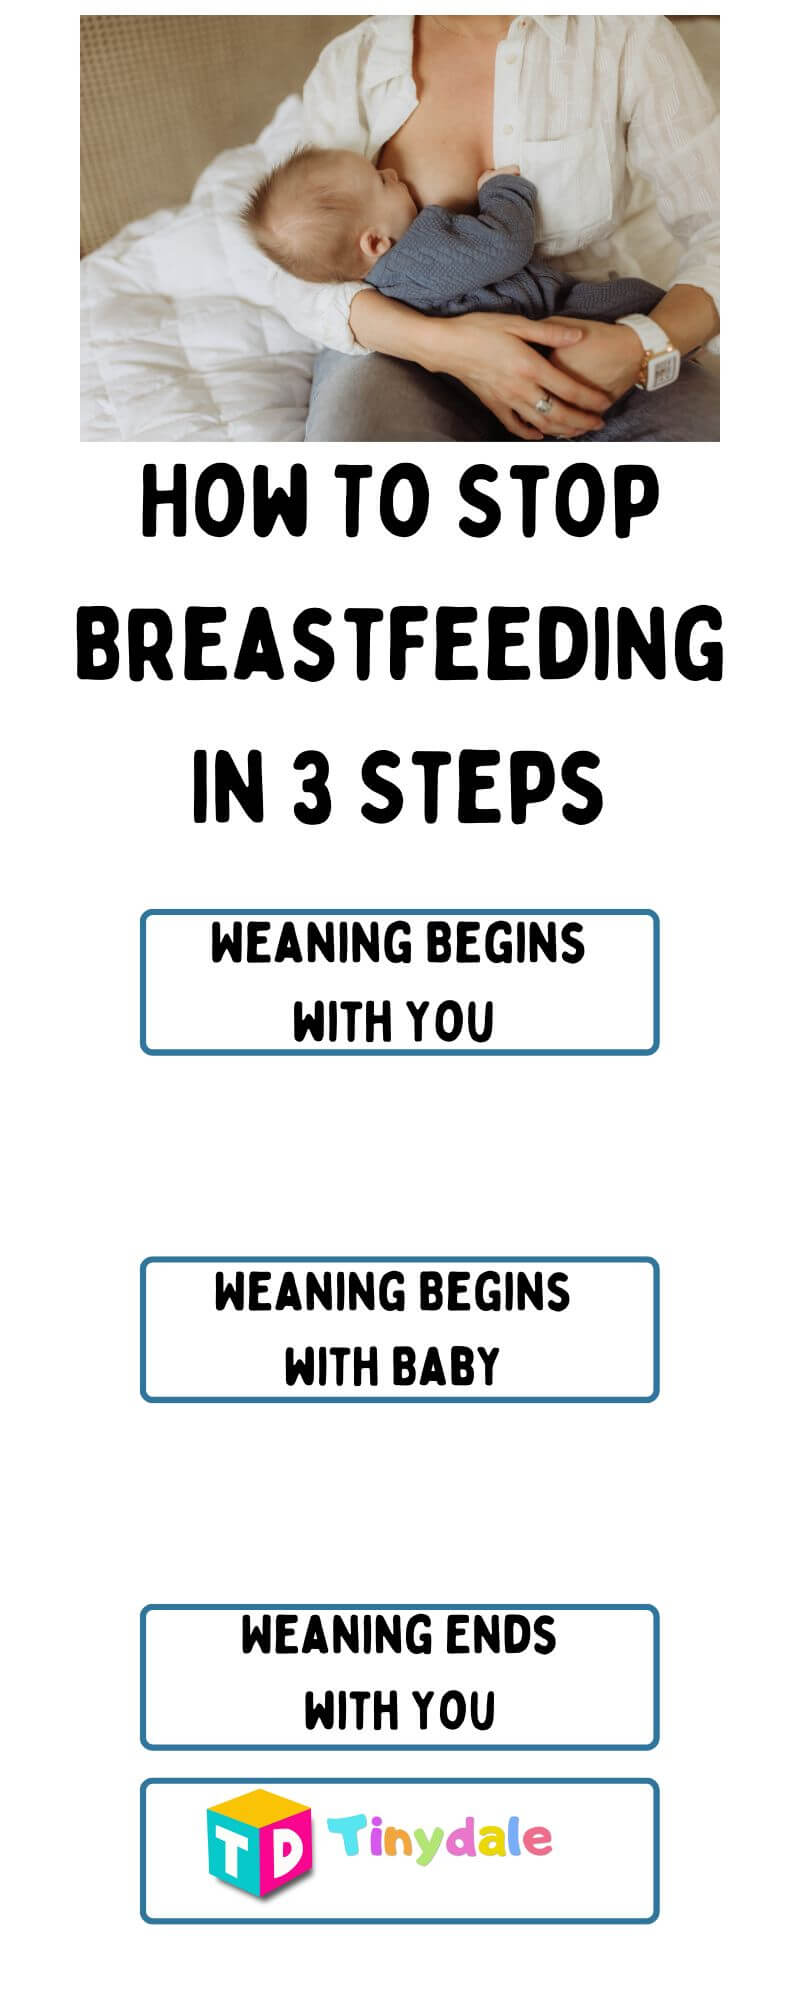 How To Stop Breastfeeding In 3 Steps infographic